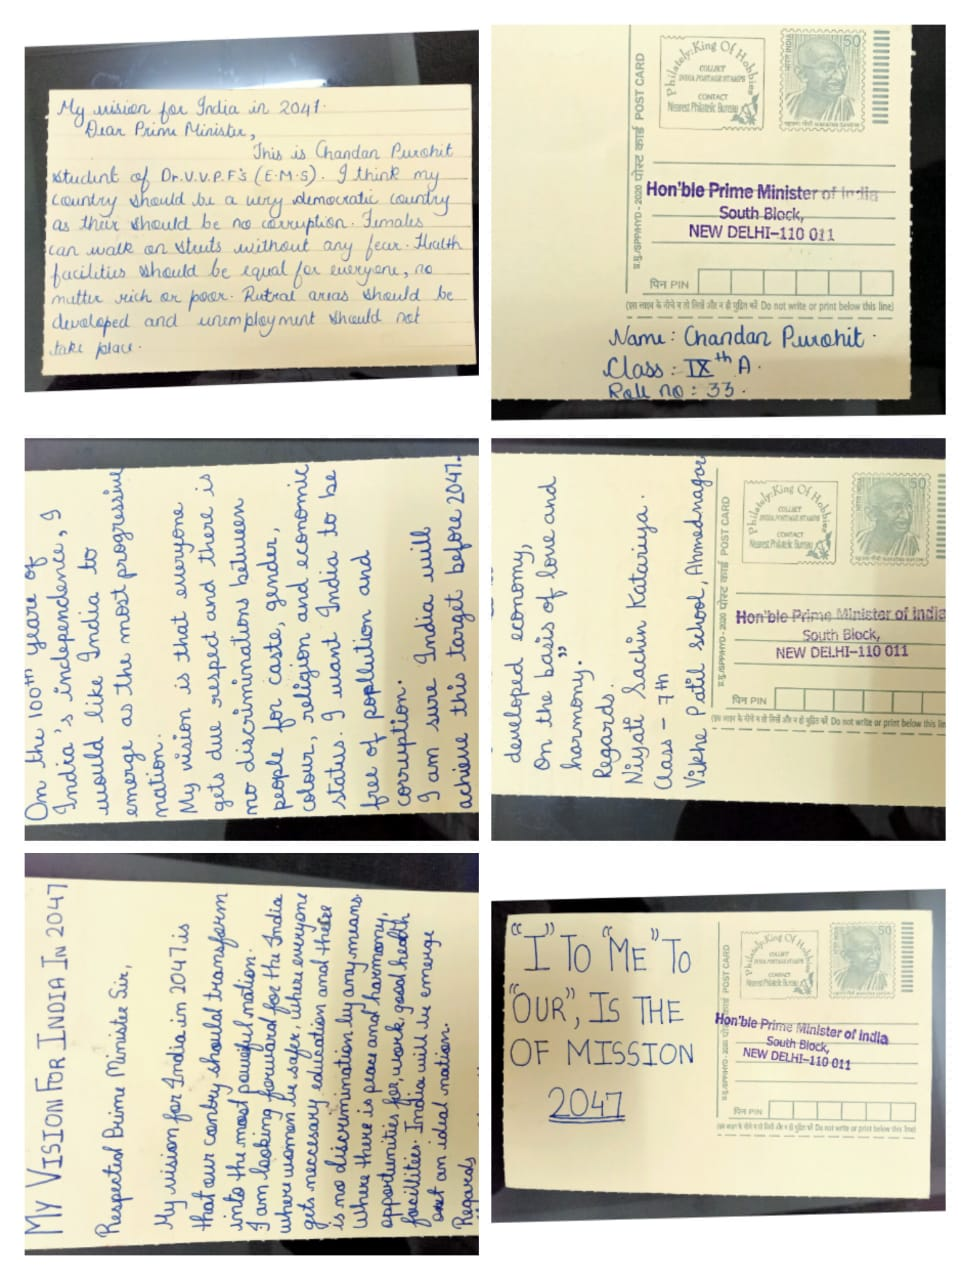 Student Participation in Postcard Campaign All India Level